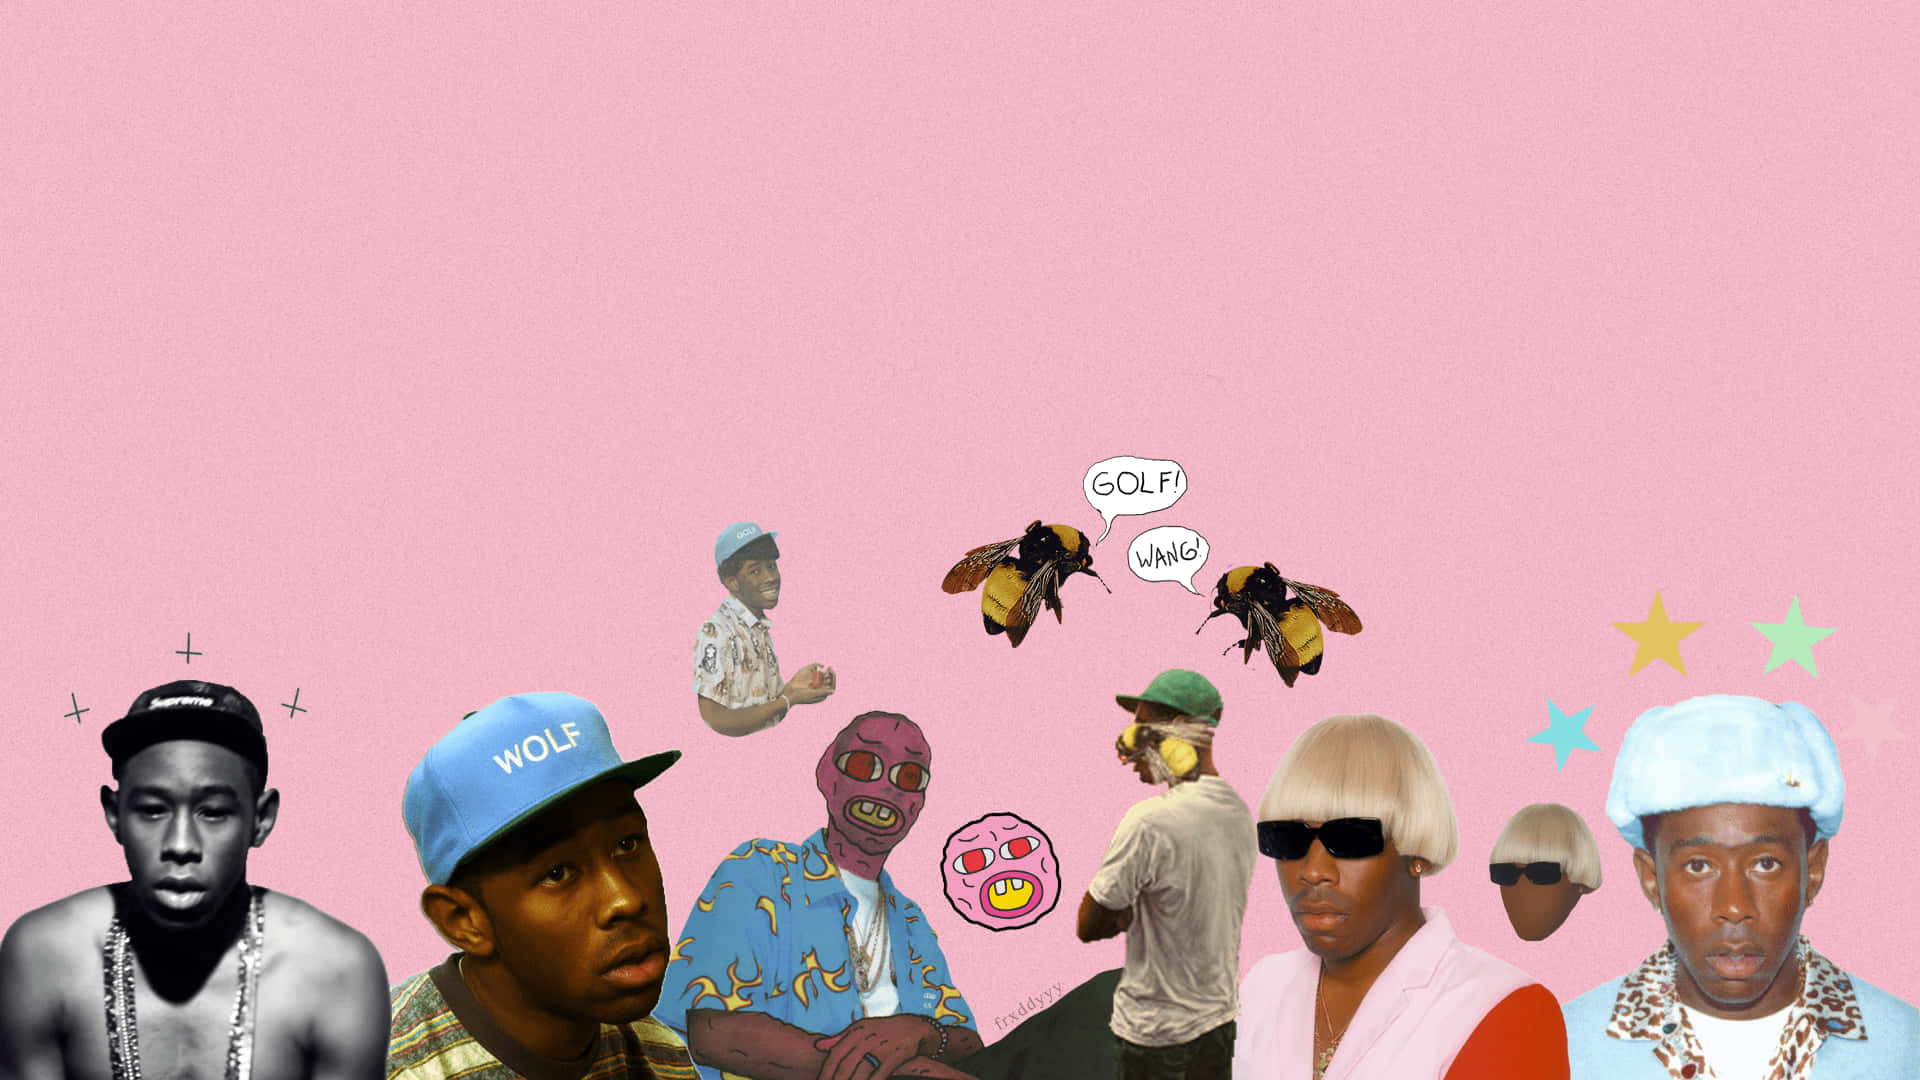 TYLER THE CREATOR wallpaper by JackieWorld  Download on ZEDGE  a3c0